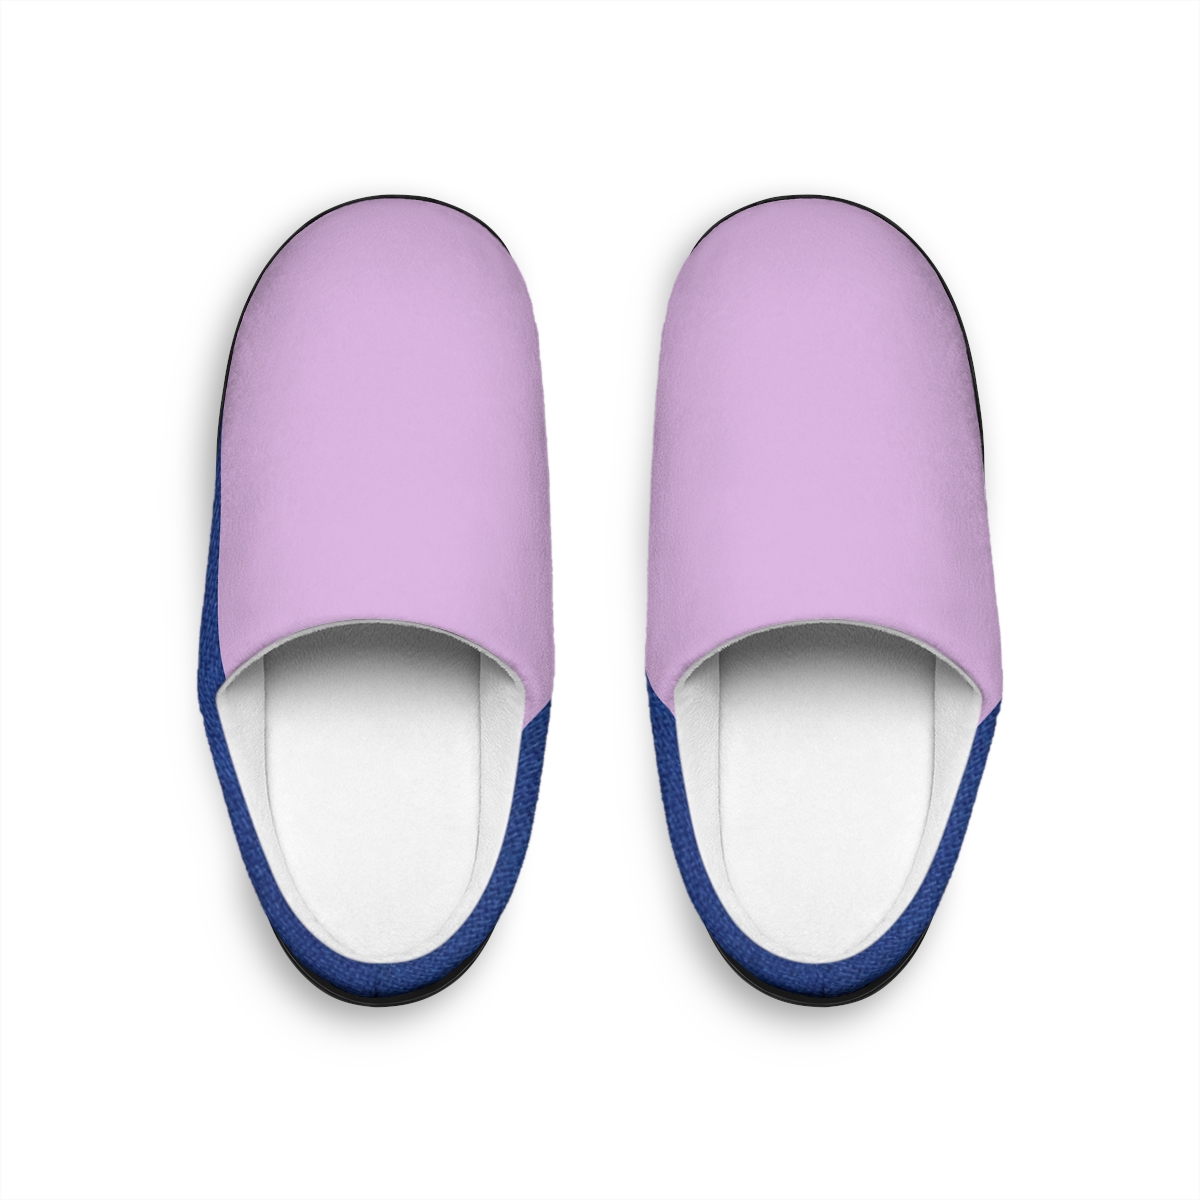 Women's Indoor Slippers-Two Tone product thumbnail image